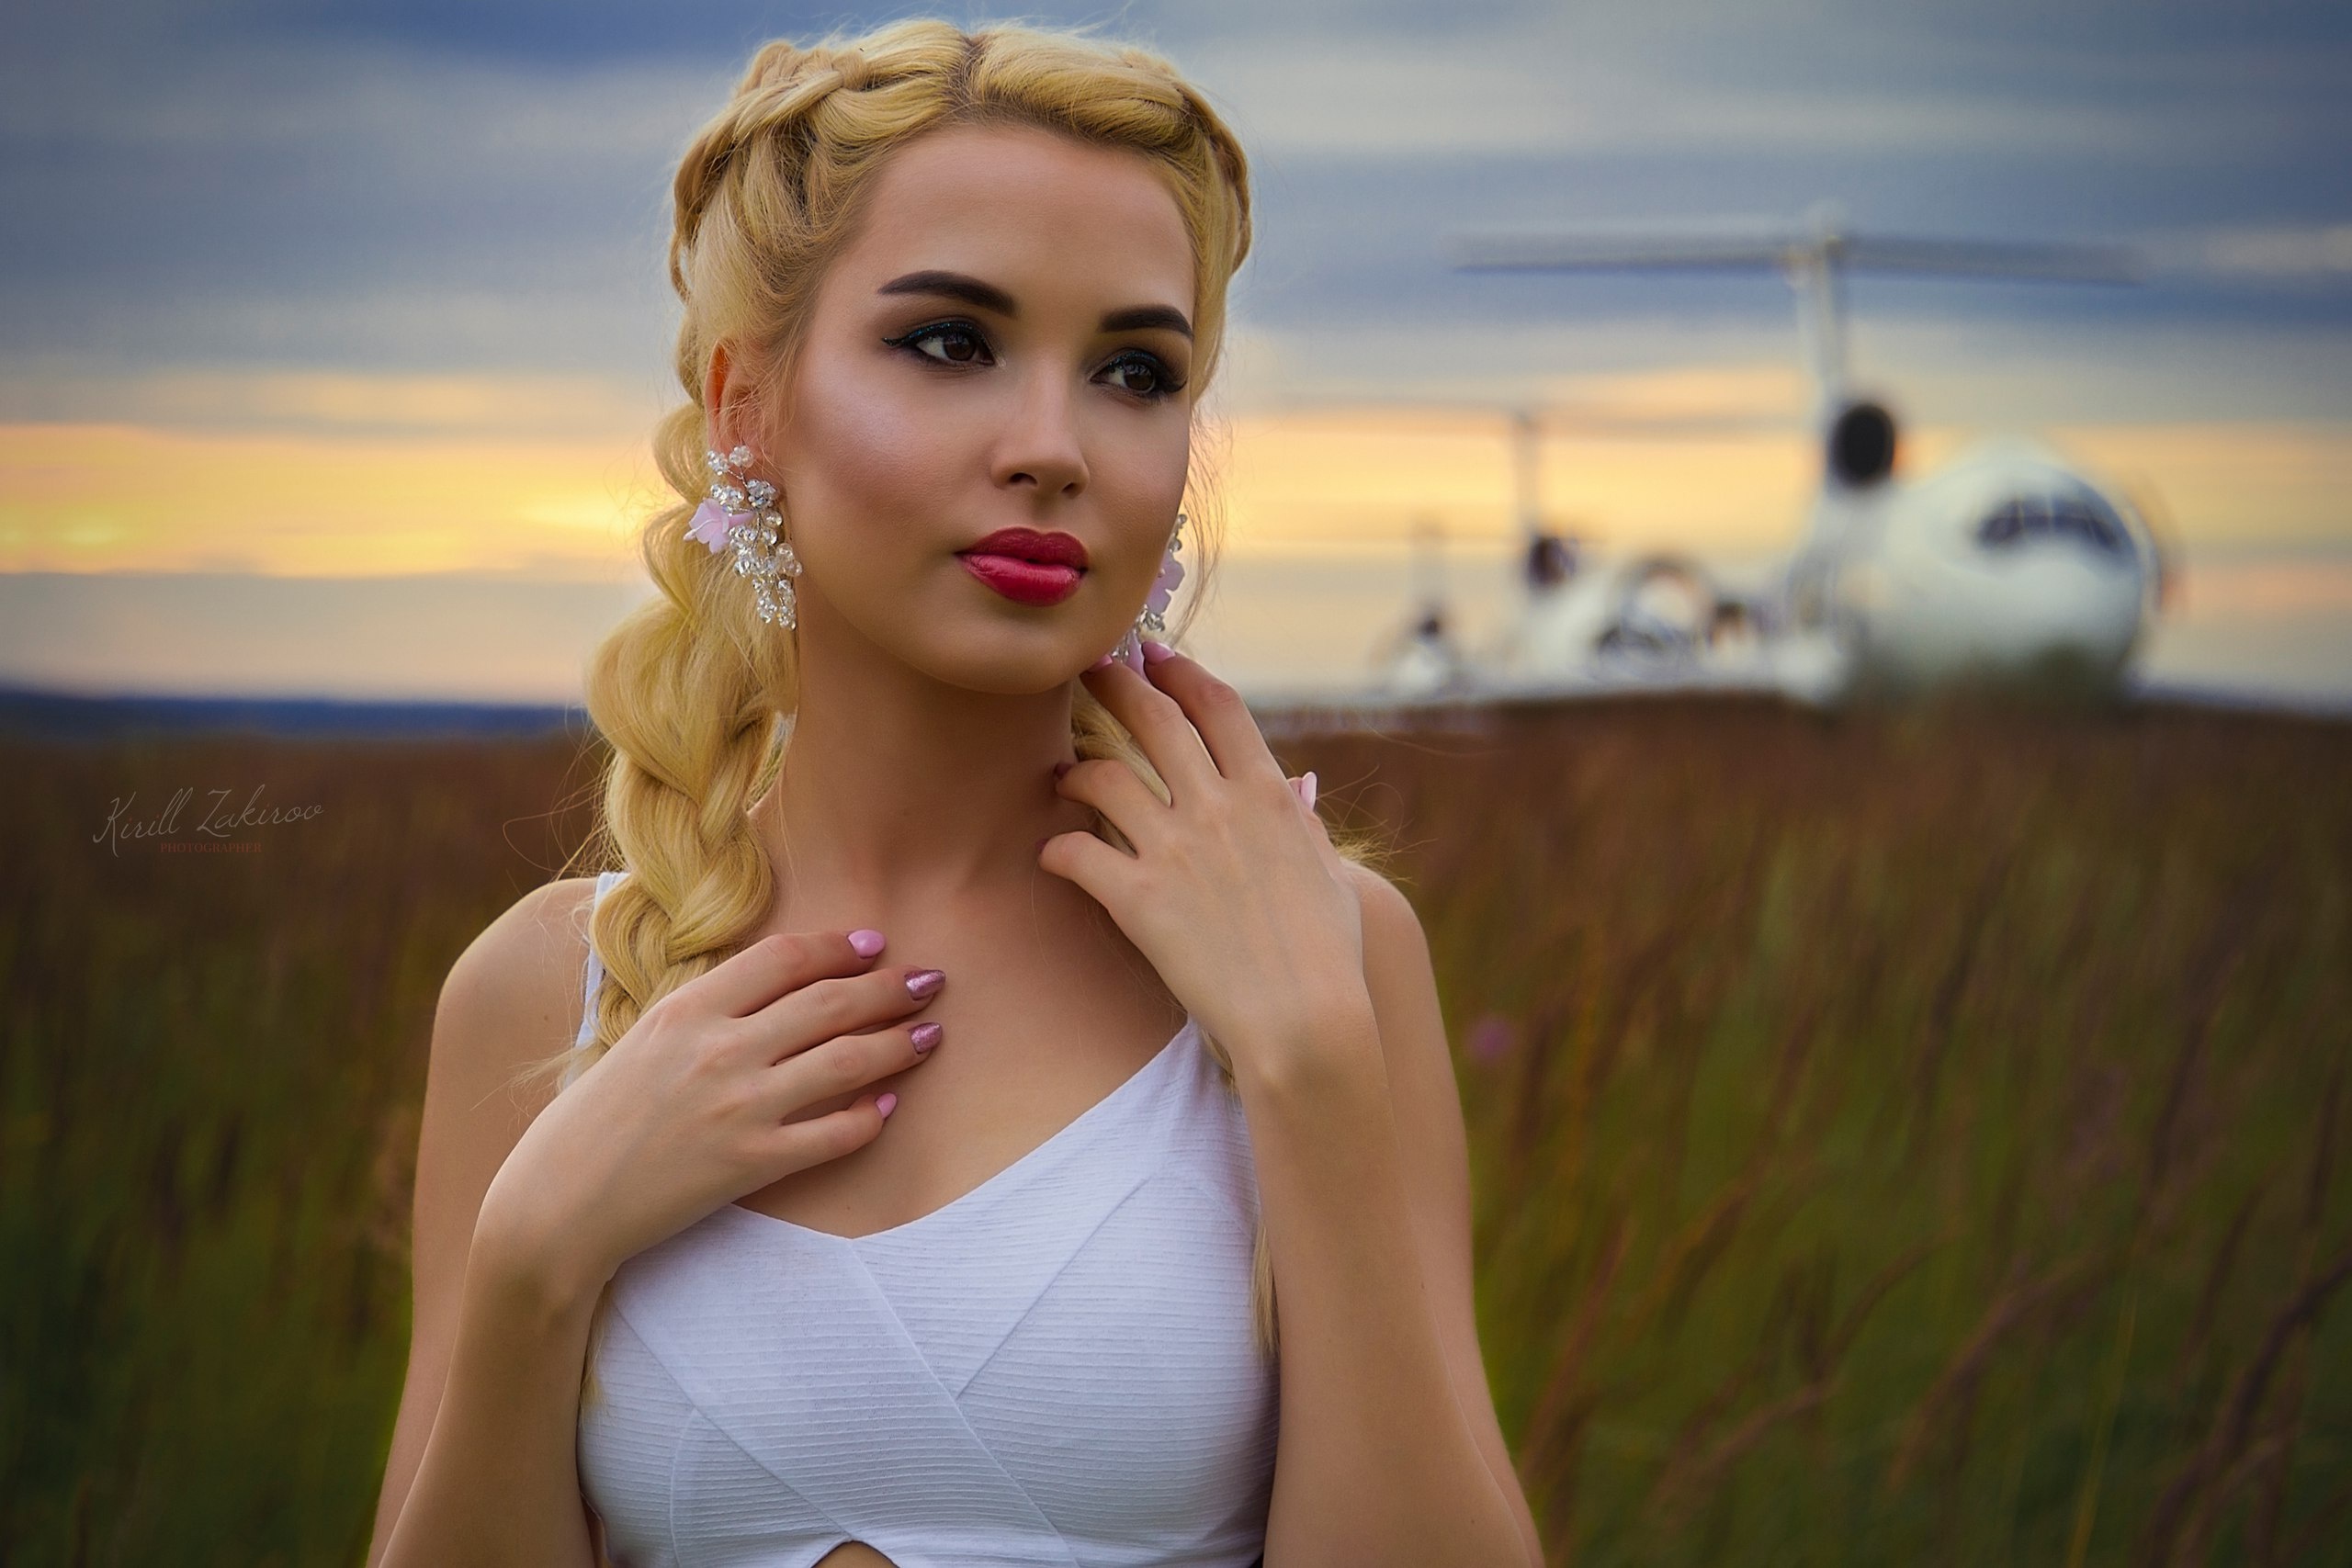 Women Model Women Outdoors Outdoors Makeup Blonde Looking Into The Distance Dyed Hair Red Lipstick P 2560x1707